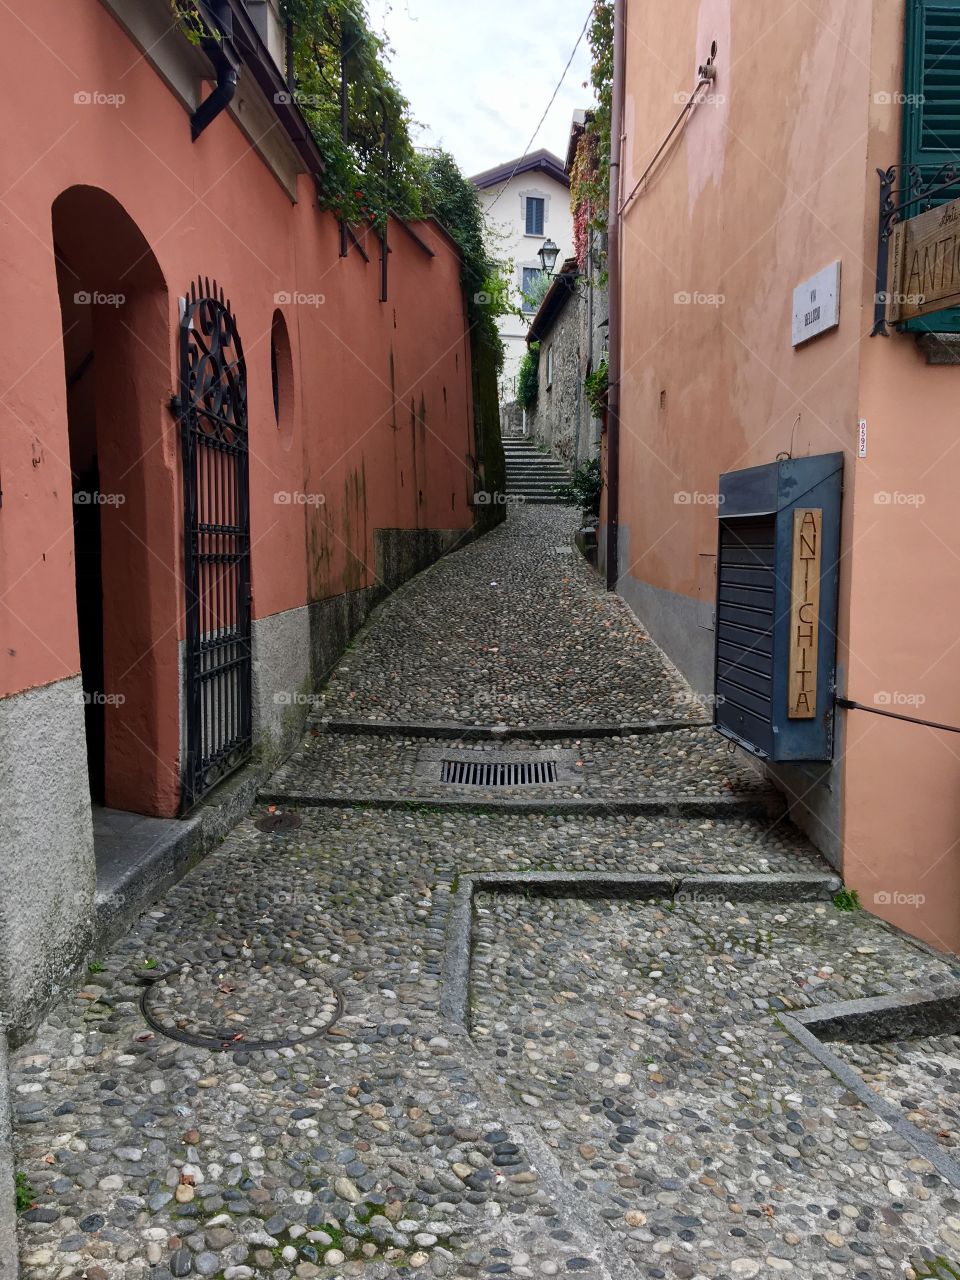 Alley in Italy